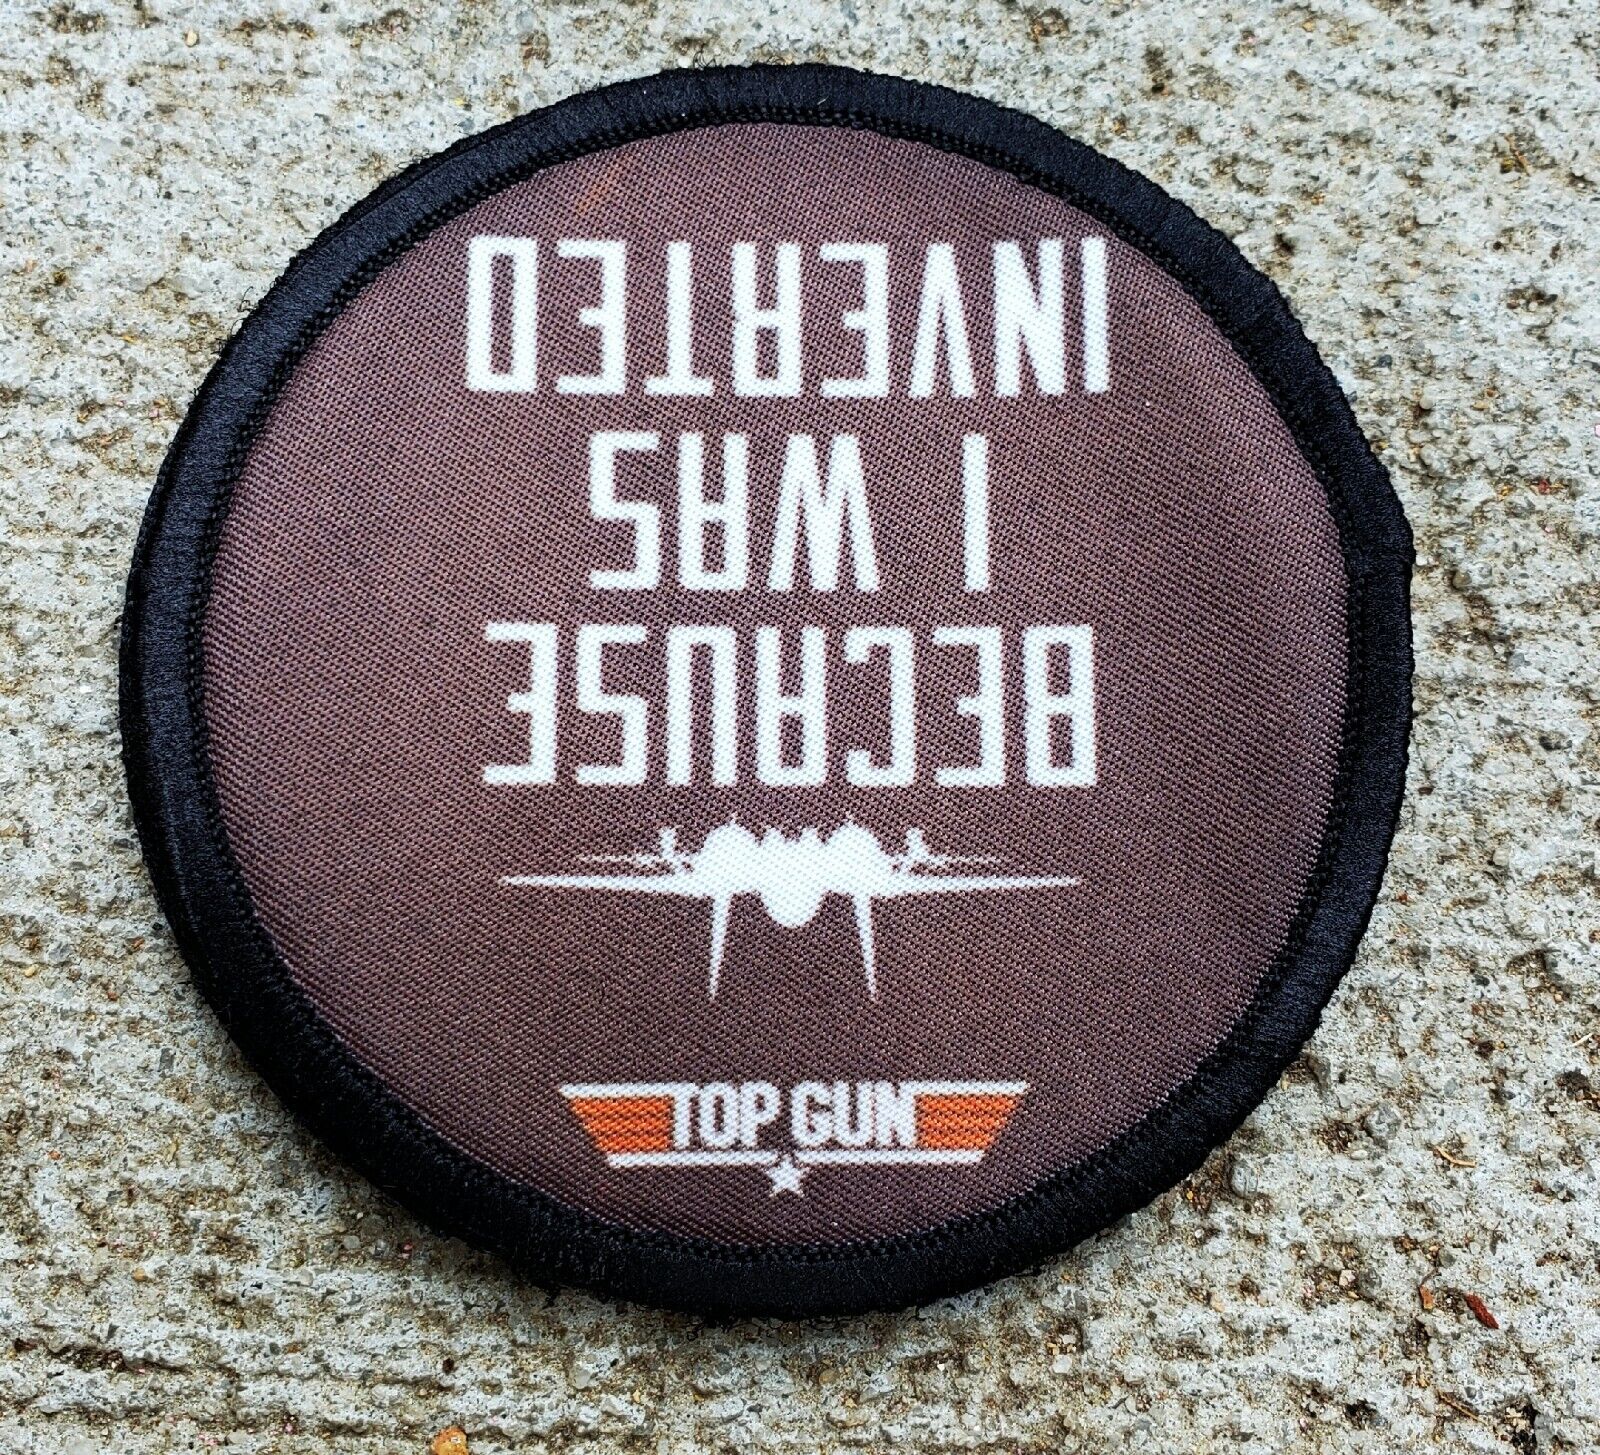 Because I Was Inverted Top Gun Movie Morale Patch Tactical Military USA Army 